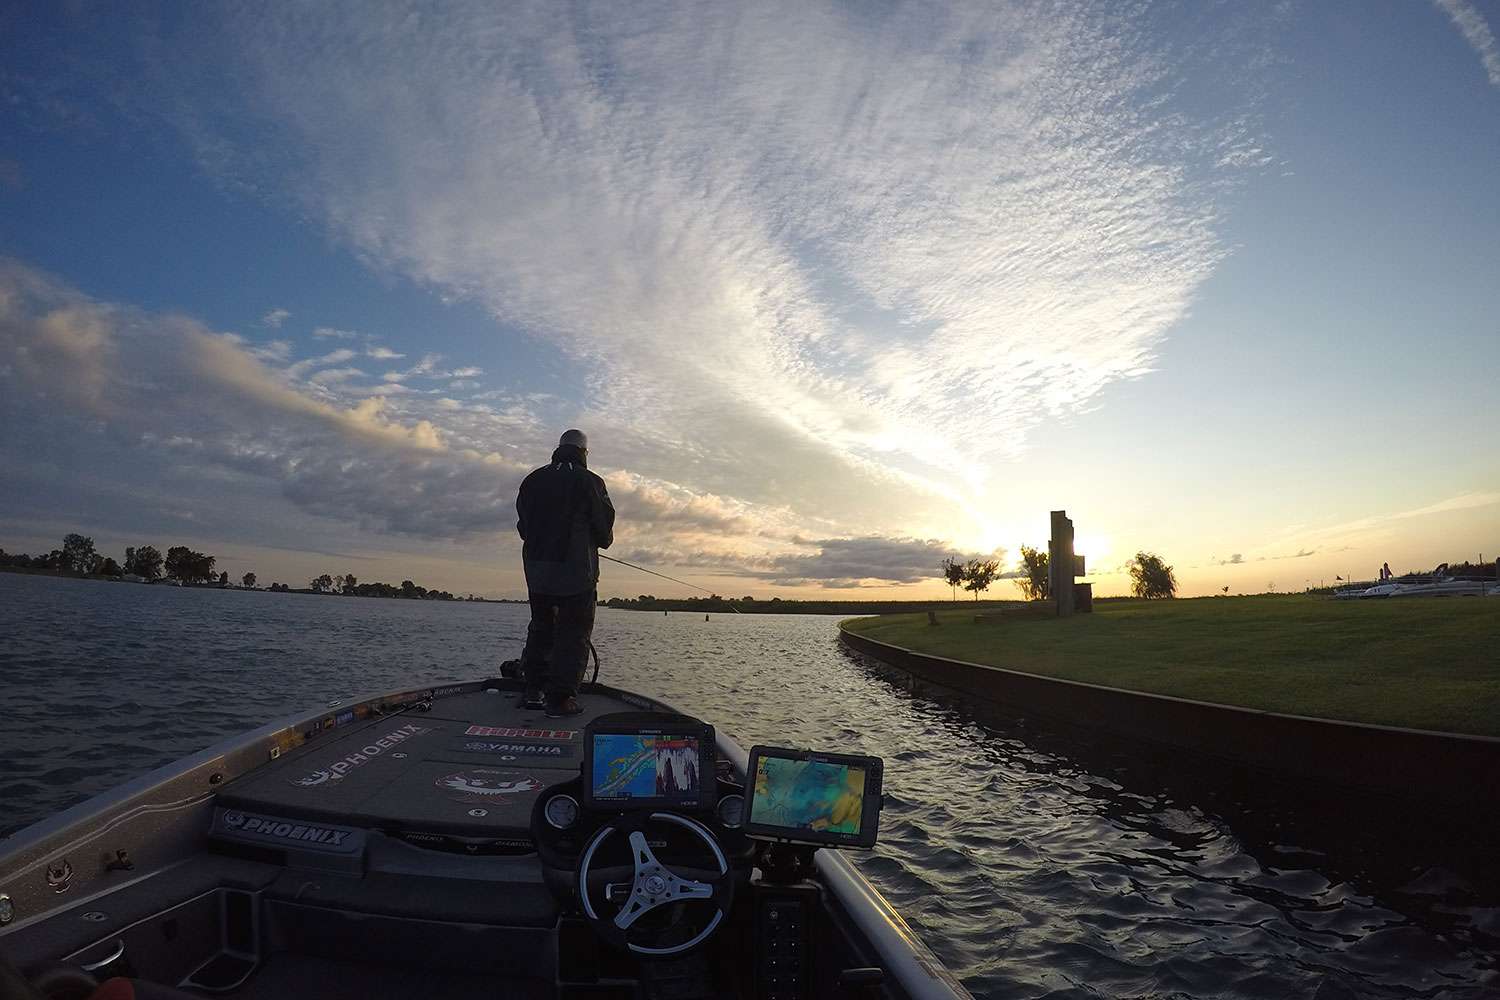 Look through Randall Tharp's first day at the Advance Auto Parts Bassmaster Elite at Lake St. Clair. Tharp's marshal Pablo Garcia shot the following images on one of Bassmaster's GoPros providing a very unique perspective and cool photos.